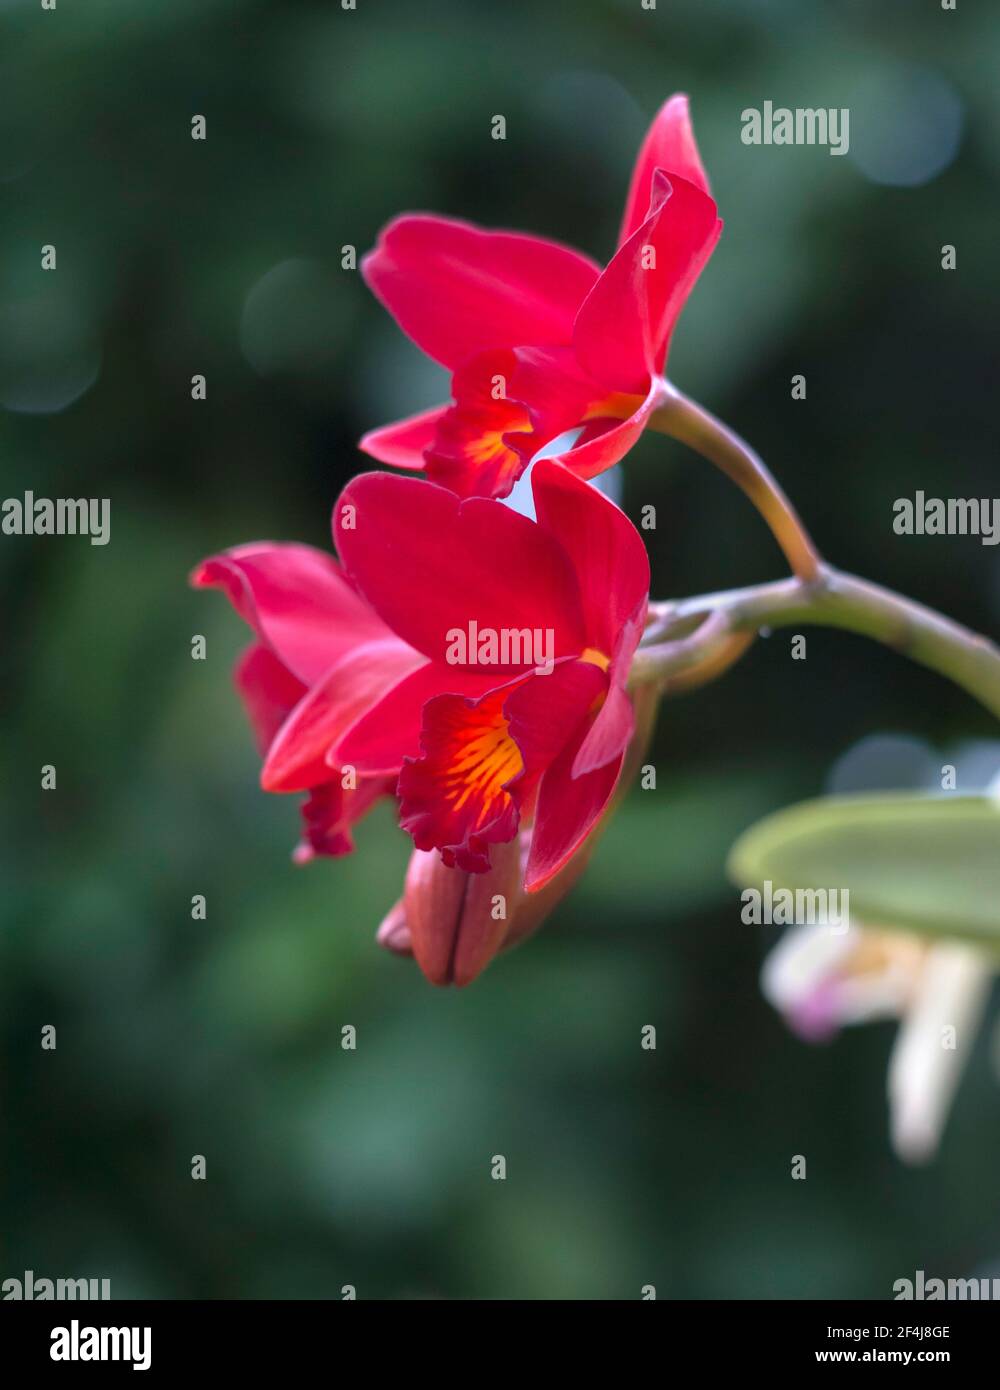 Red Cattleya laelinea hybrid orchids in very narrow depth-of-field photo Stock Photo